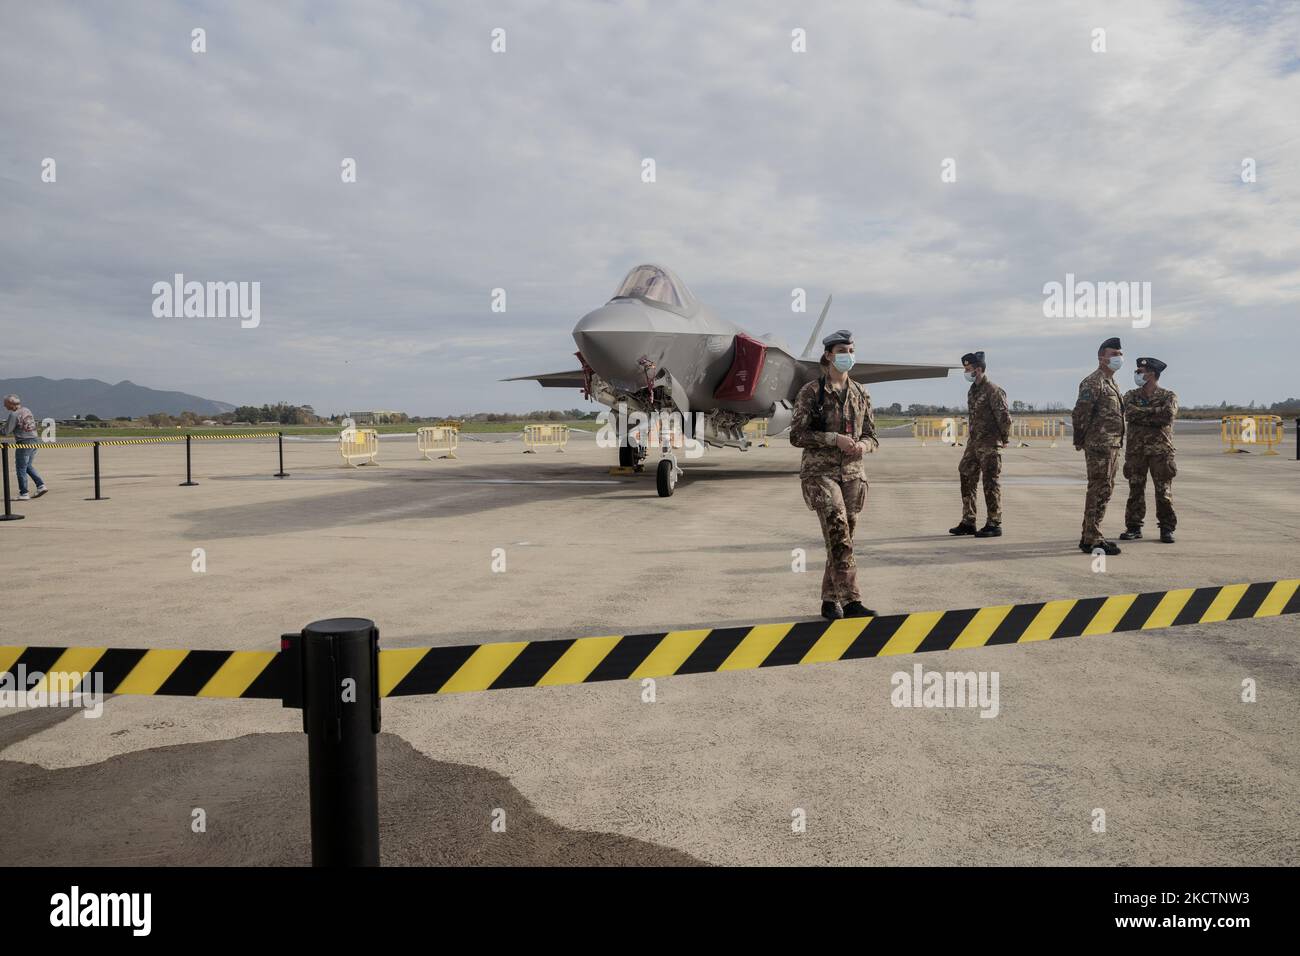 F-35 combat aircraft displayed during the commemoration of the Kindu massacre at the military airport in Pisa, Italy, on November 11, 2021. The Kindu massacre, took place on 11 or 12 November 1961 in Kindu Port-Émpain, in the Congo-Léopoldville, former Belgian Congo, where thirteen Italian airmen, members of the United Nations Operation in the Congo, were murdered. The massacre was commemorated today by the 46th Air Brigade of Pisa inside the military airport at the Kindu Shrine. The mass was celebrated by the Military Ordinary, Archbishop Santo Marcianò, at the presence of the Chief of Staff  Stock Photo